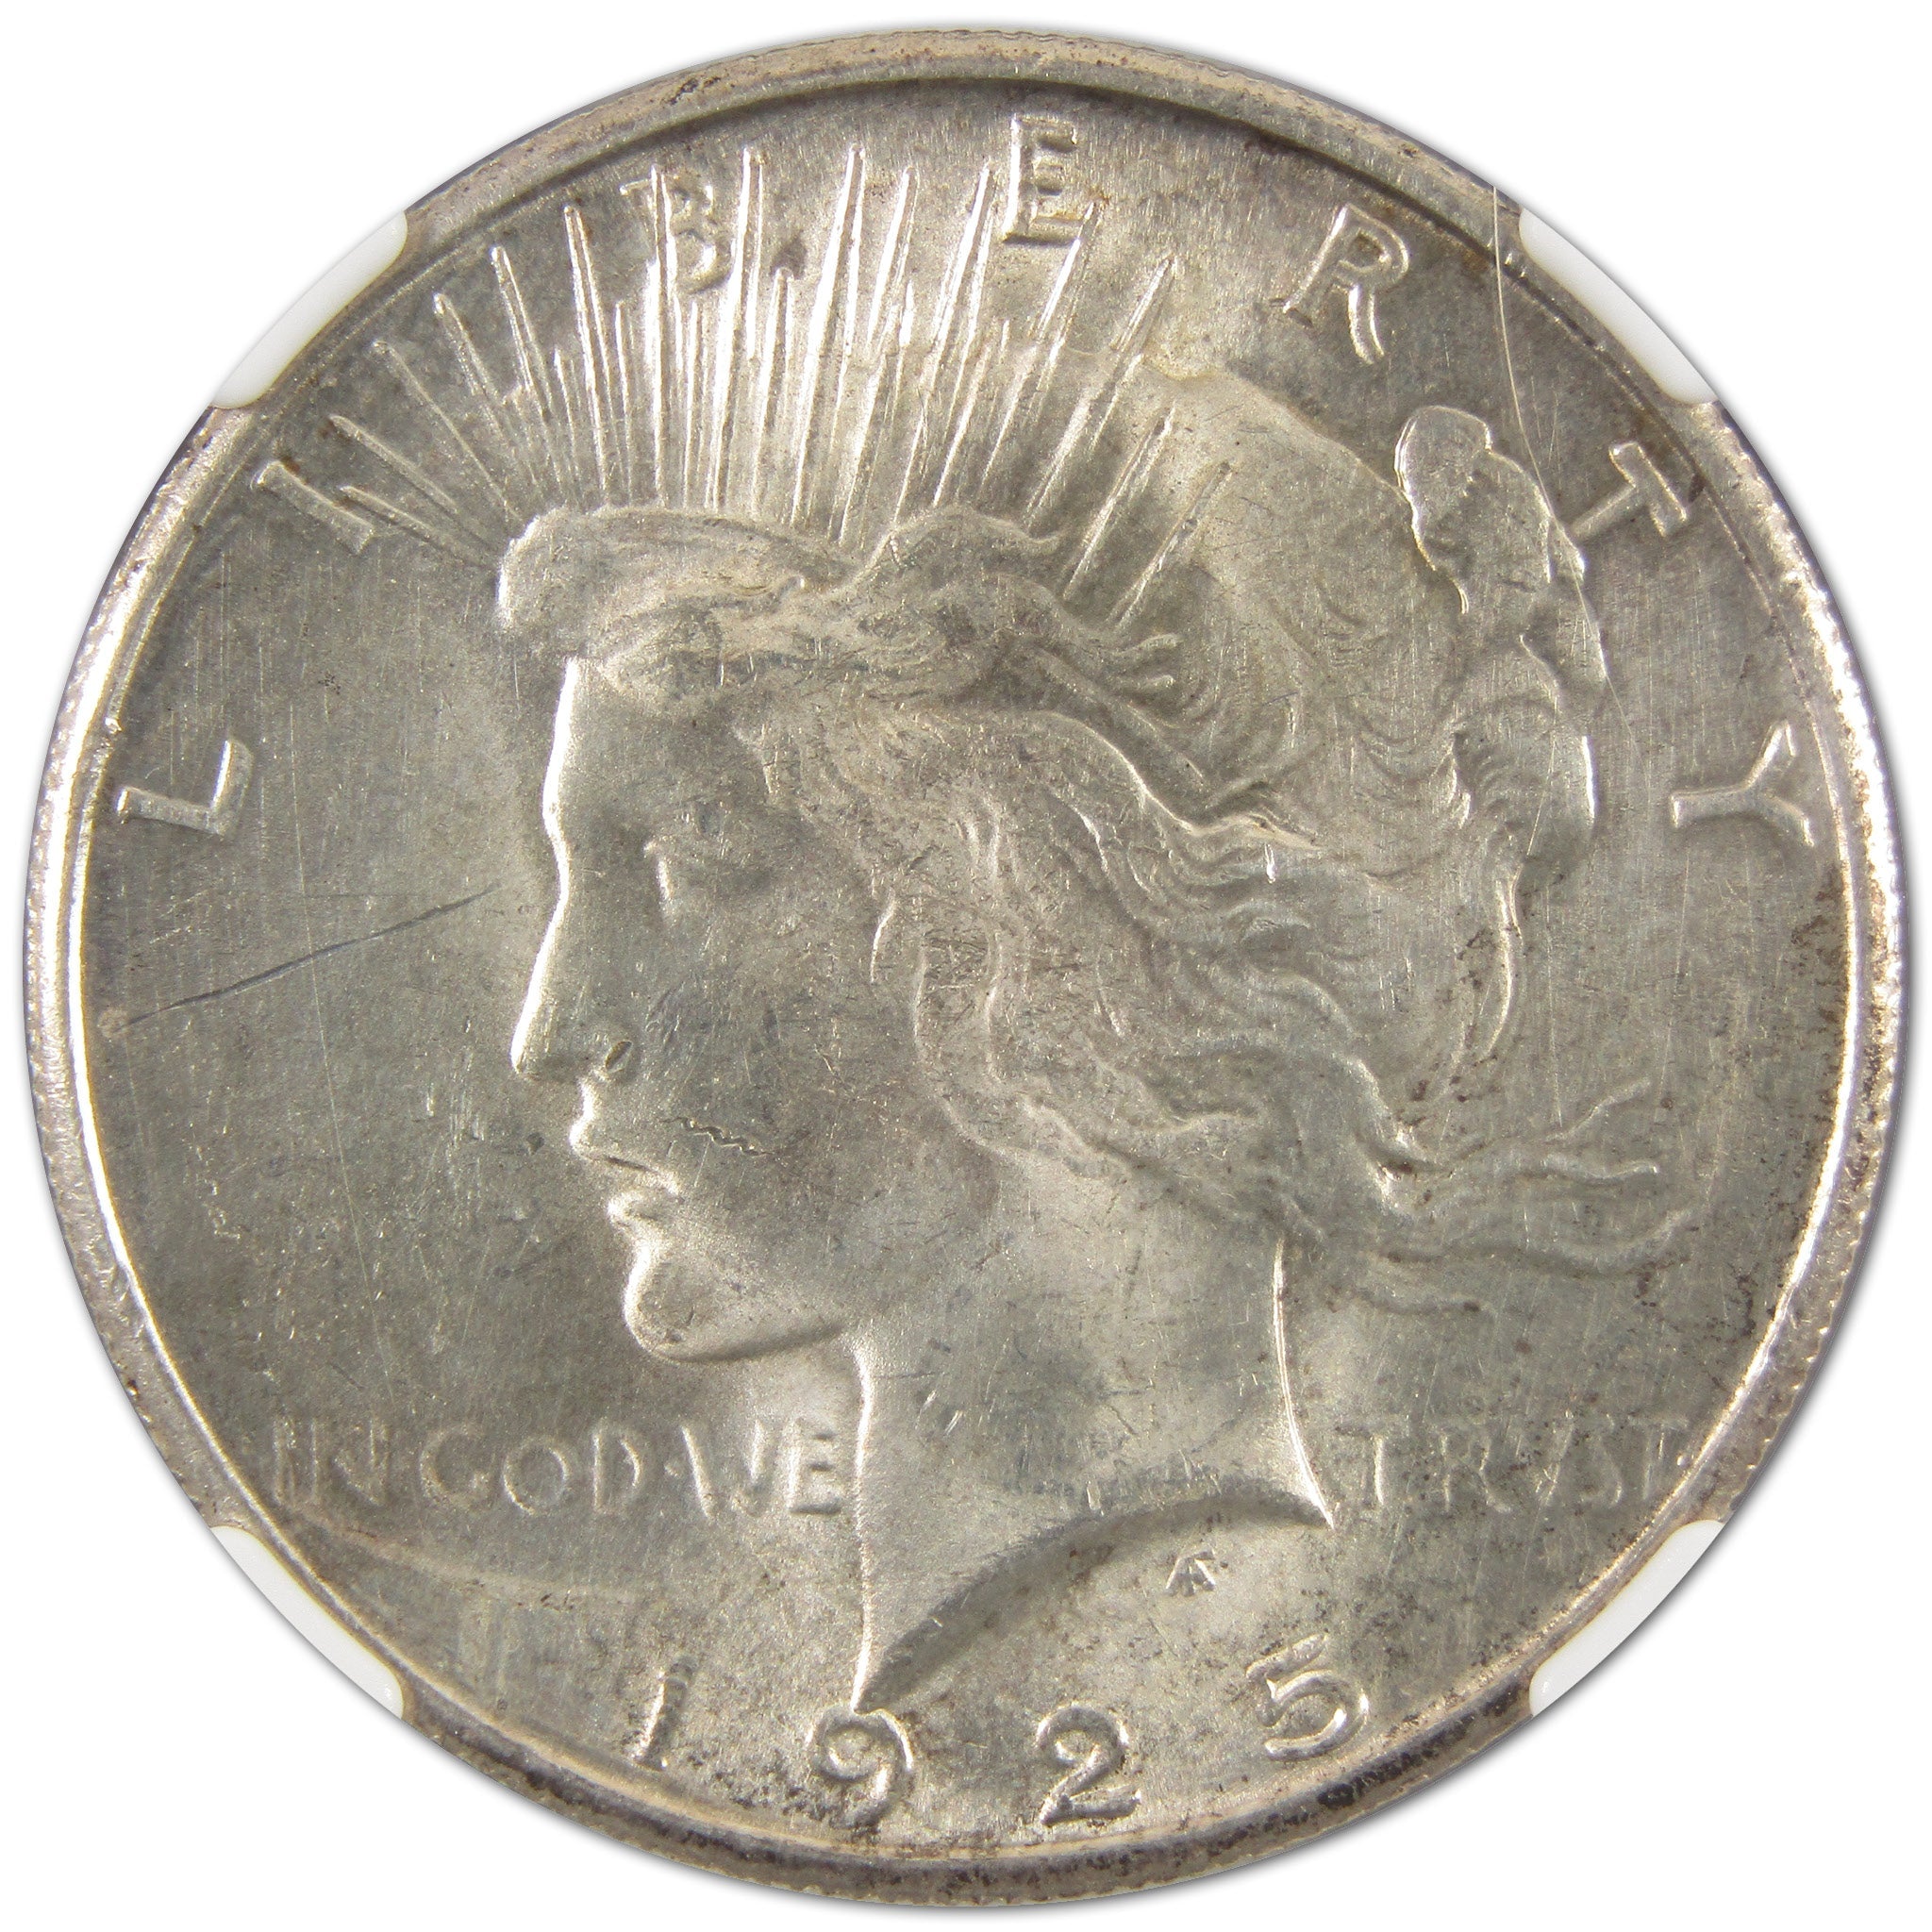 1925 S Peace Dollar MS 61 NGC Silver $1 Uncirculated Coin SKU:I10894